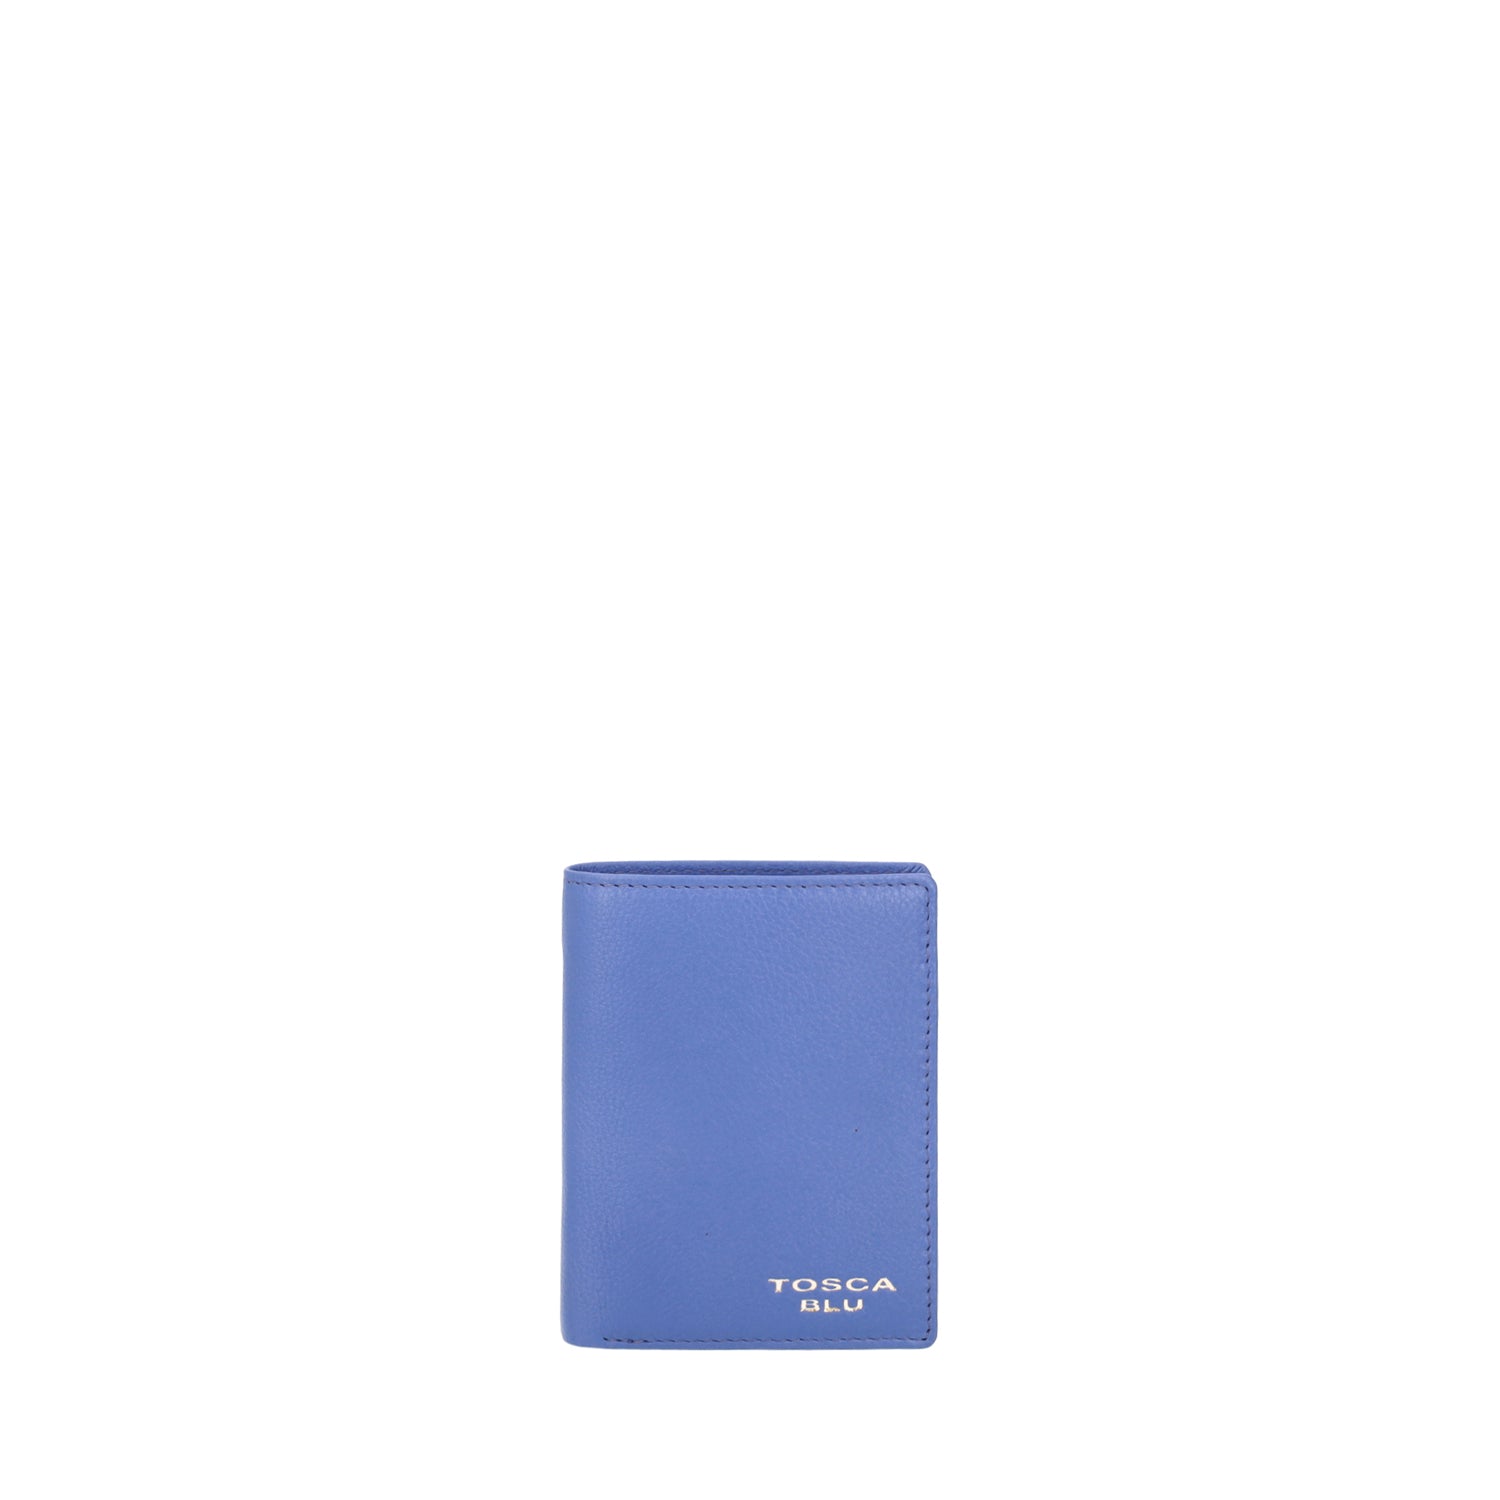 VIOLET MARGHERITA SMALL LEATHER WALLET